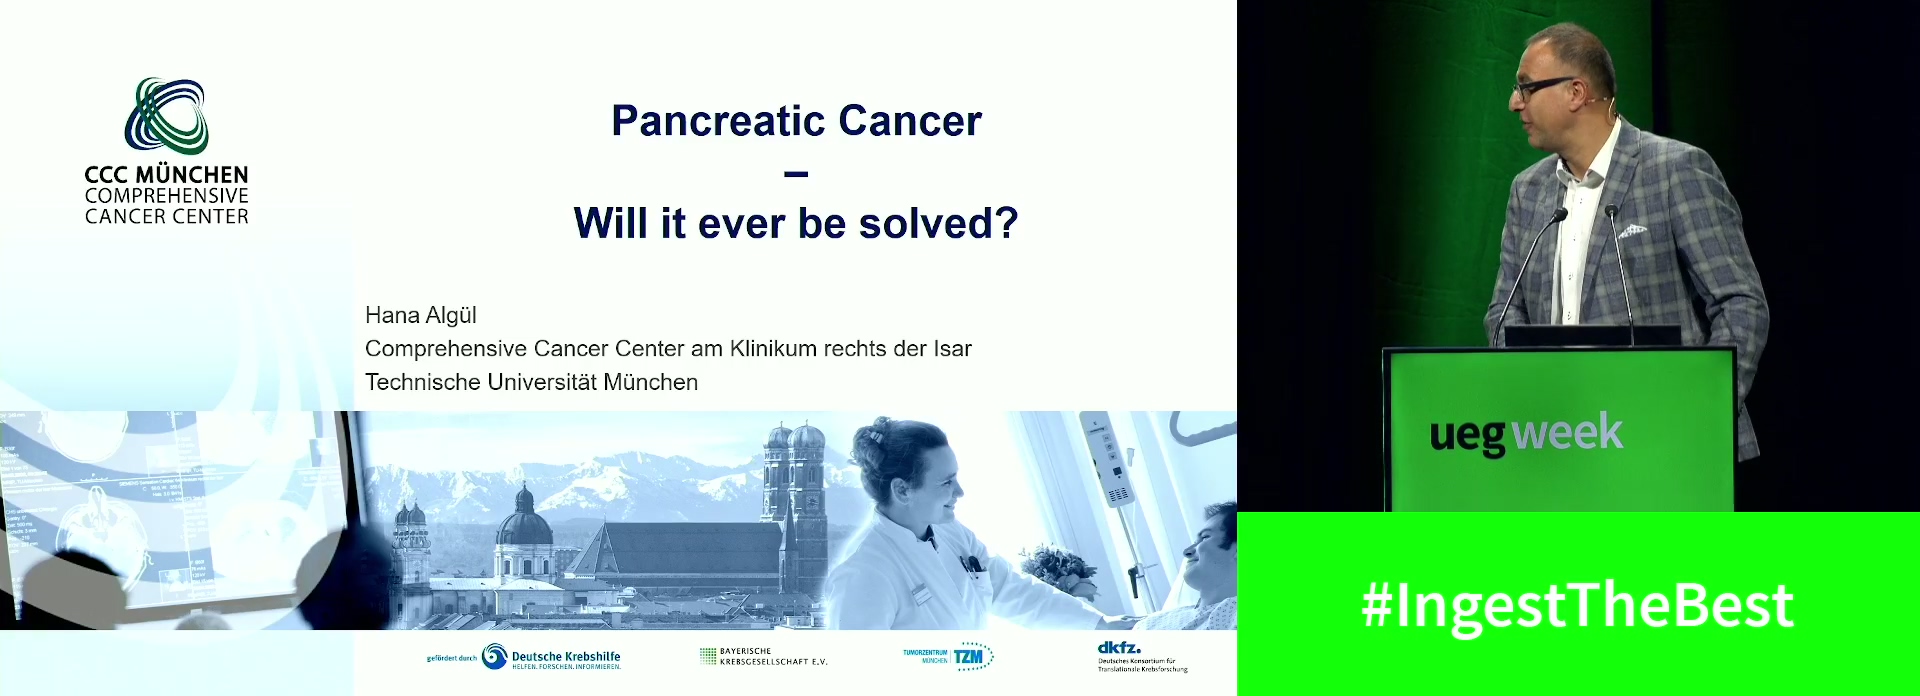 Pancreatic cancer: Will it ever be solved?